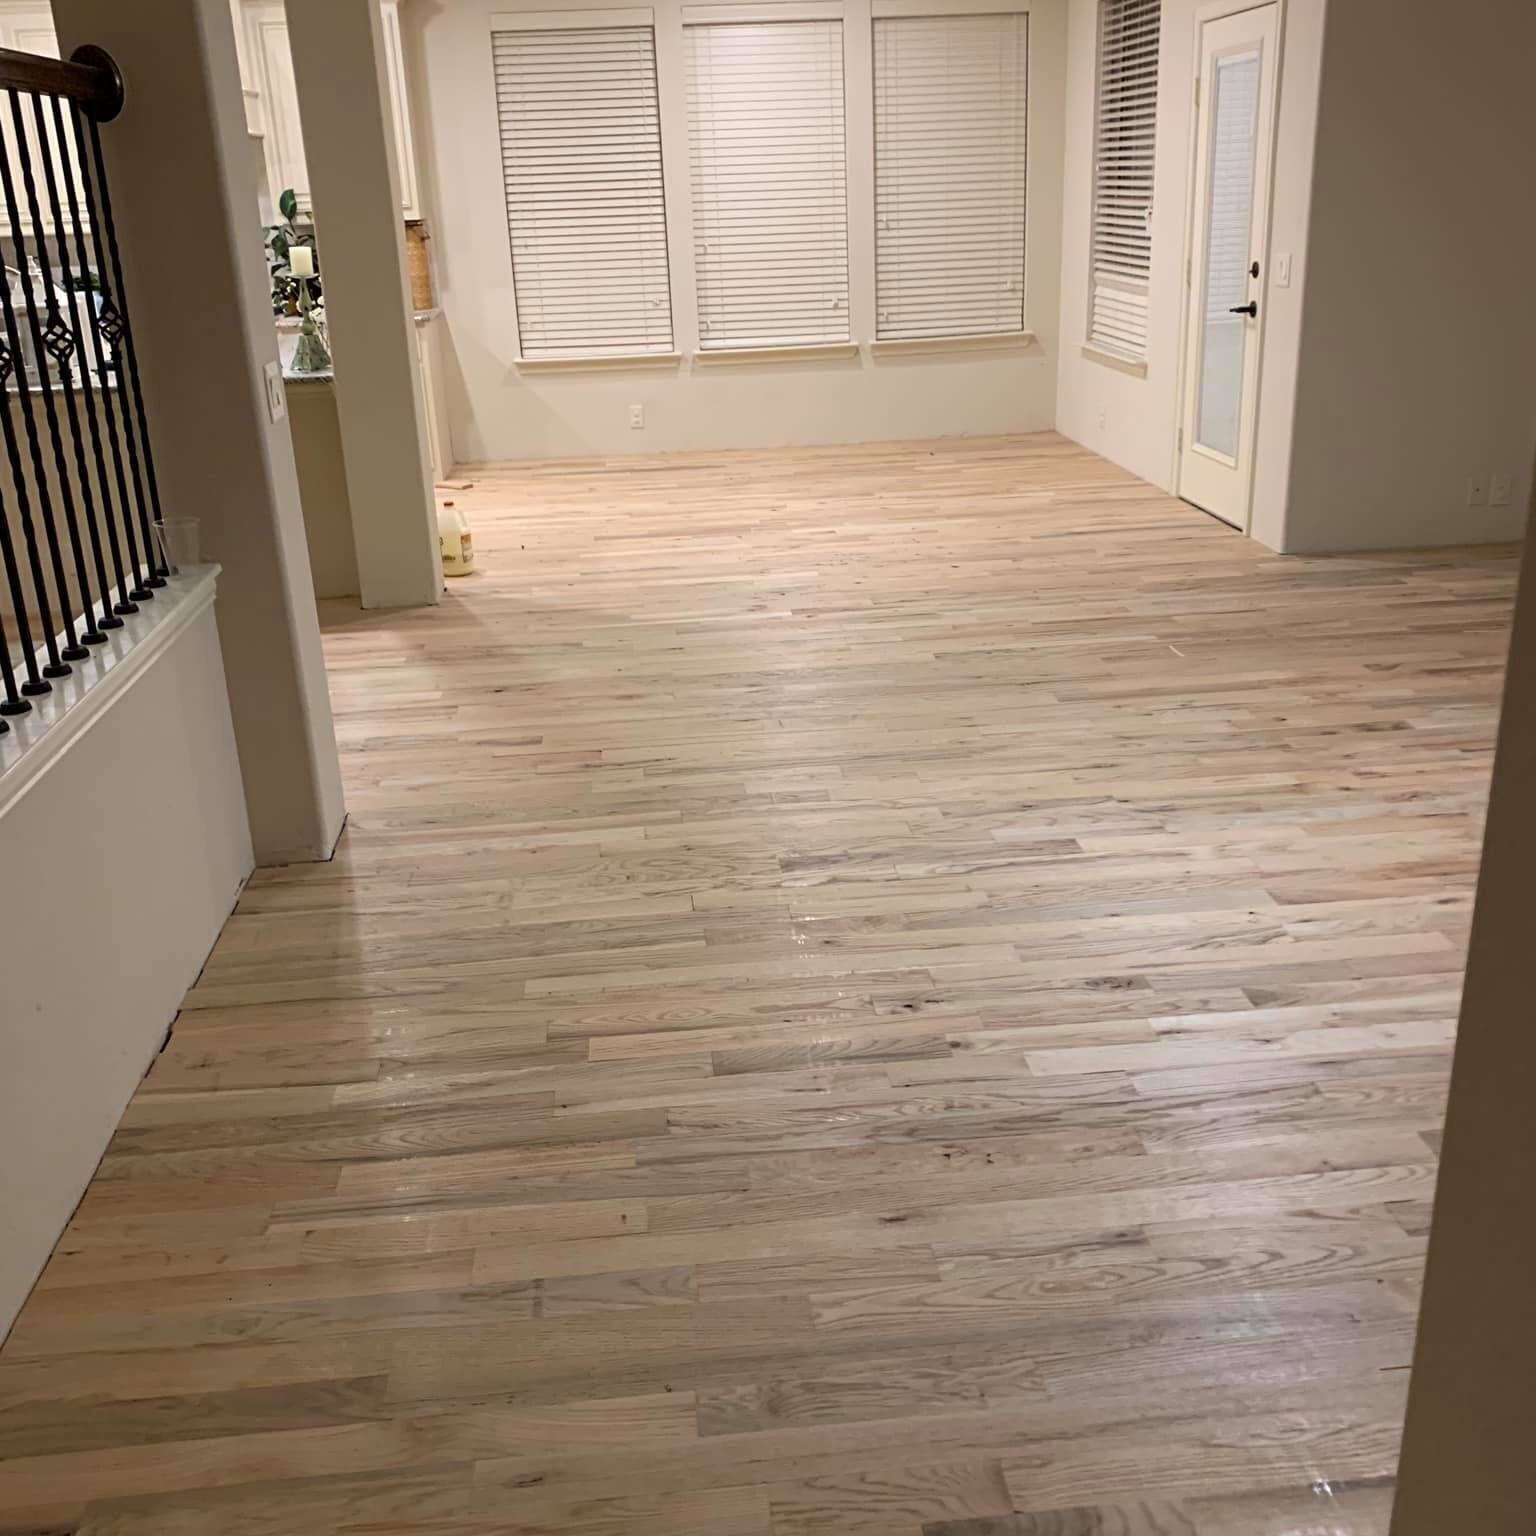 Flooring Installation Services by a Construction and Remodel Contractor in Dallas, TX | Spire Construction | Page Featured Image